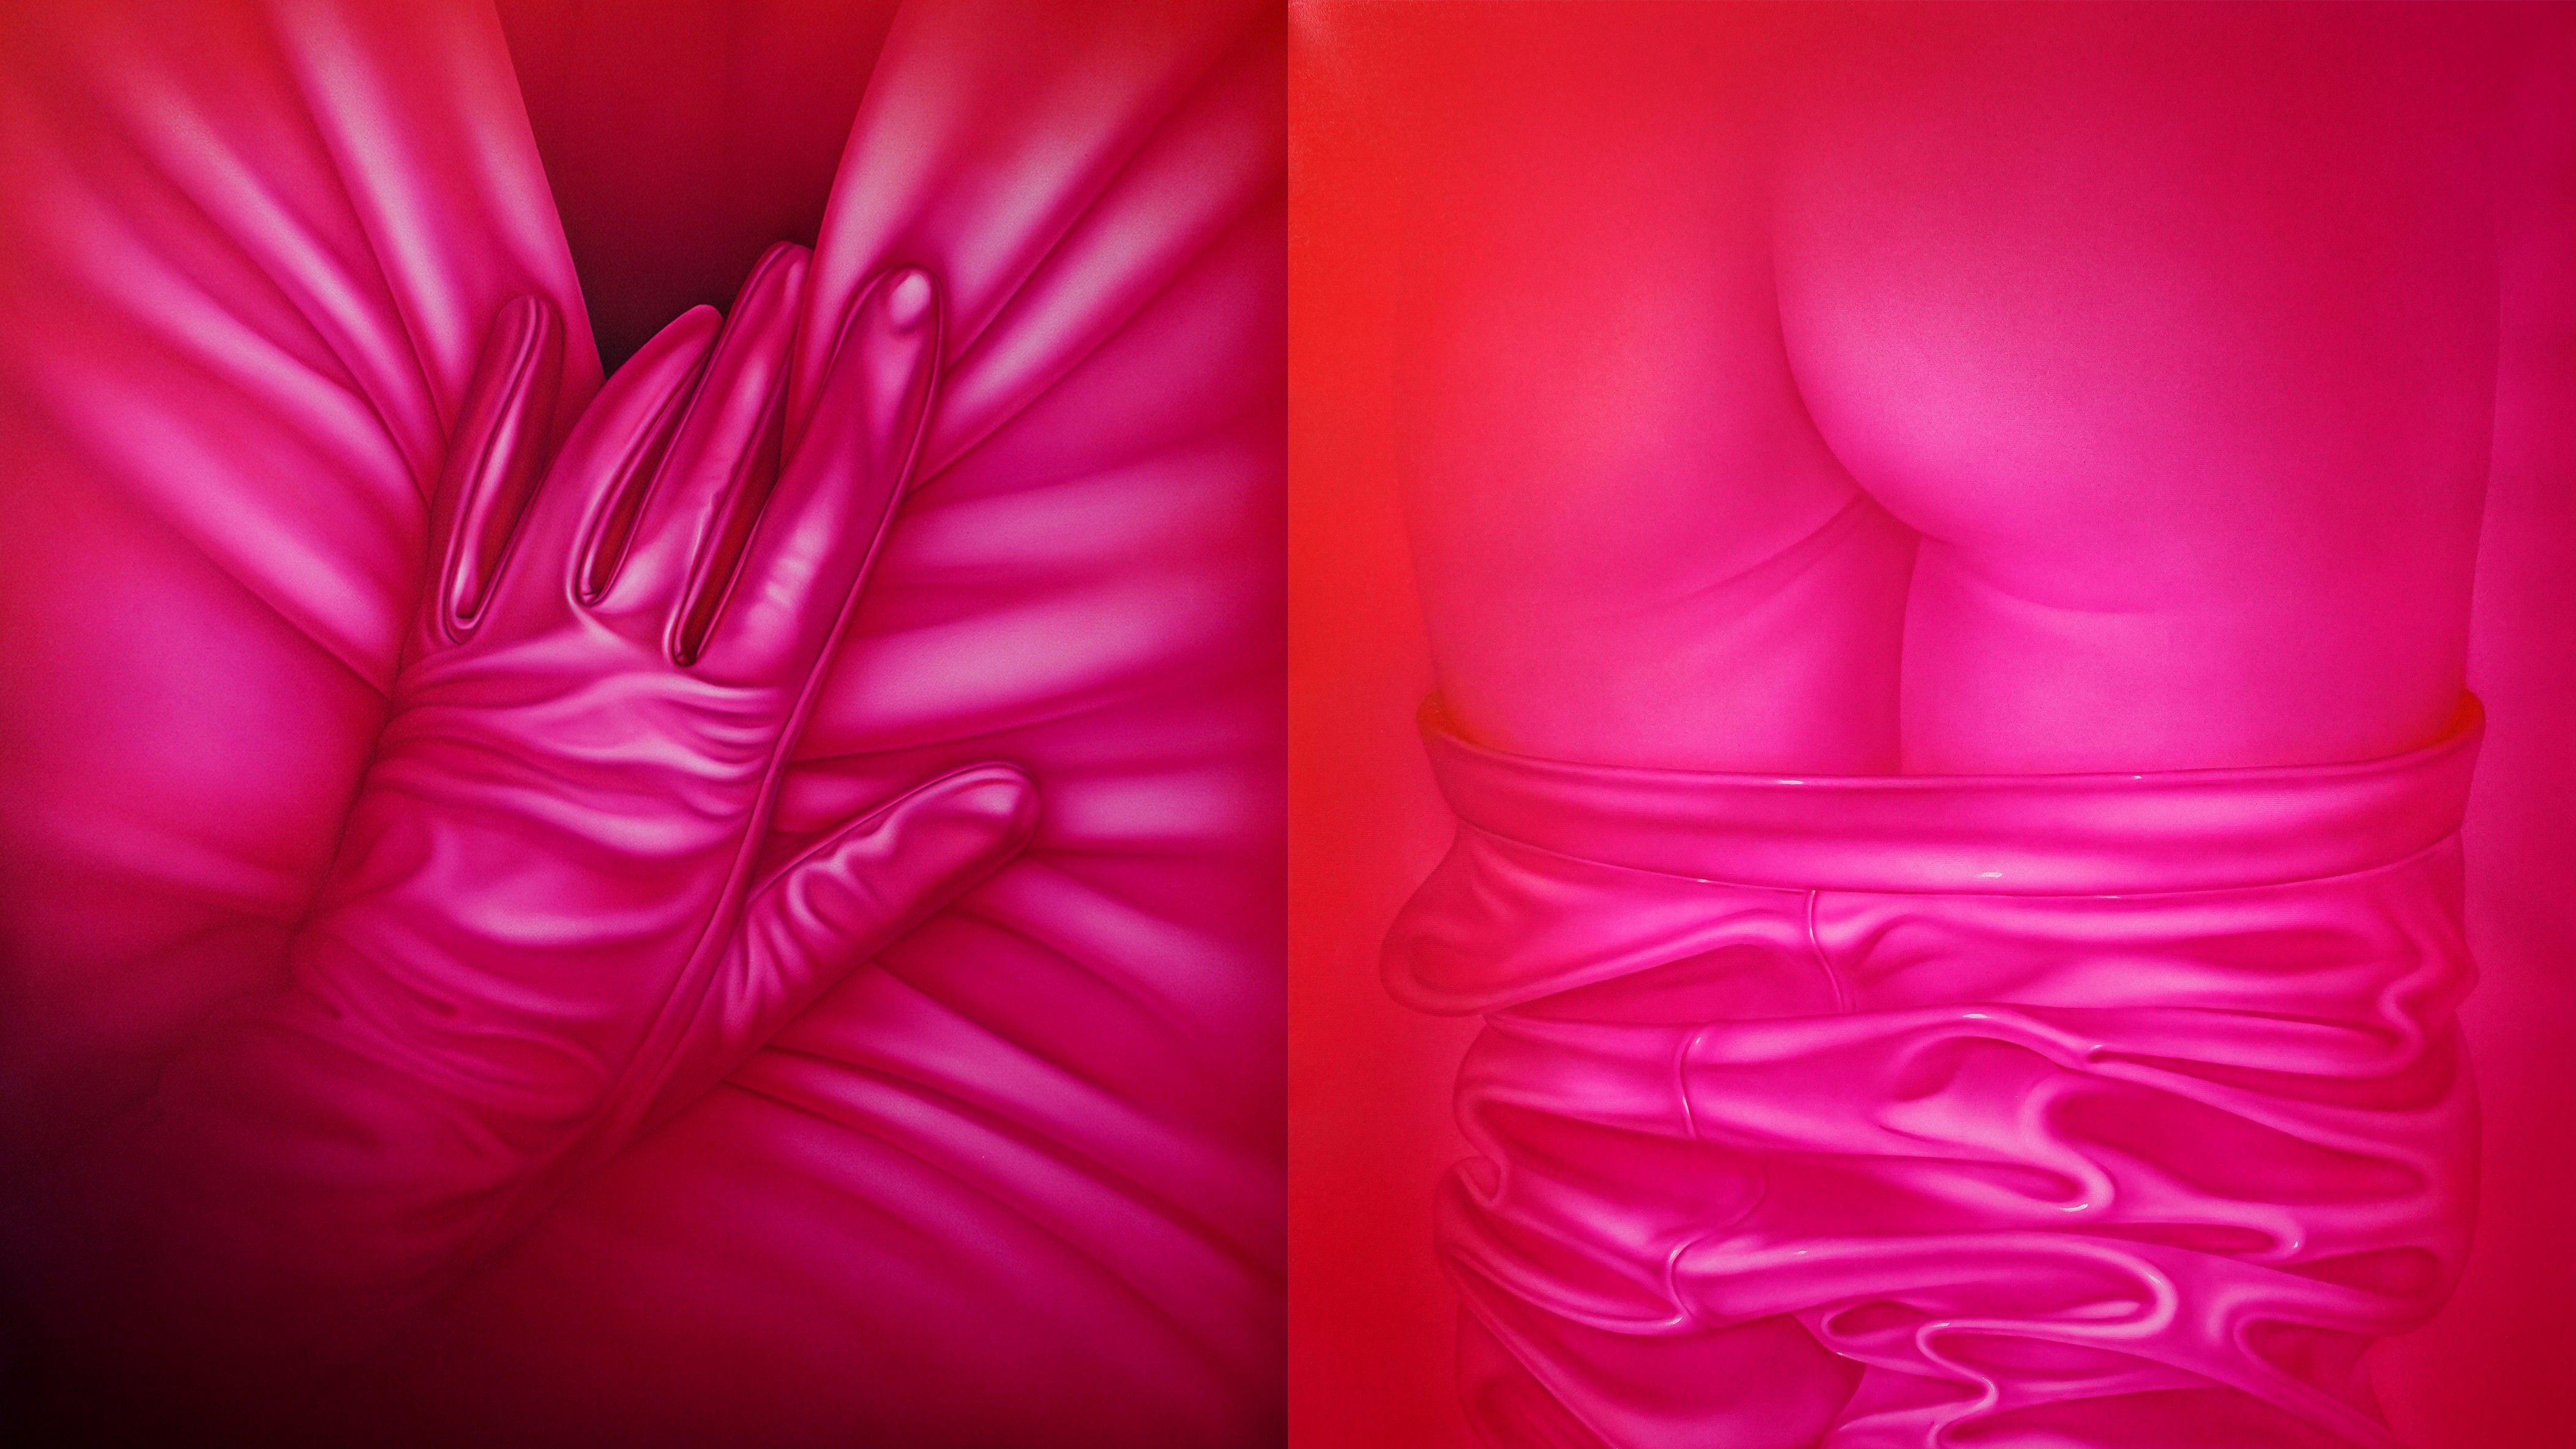 two pink paintings: a leather gloved hang pulls suggestively at fabric; a dress is pulled down exposing a nude bottom